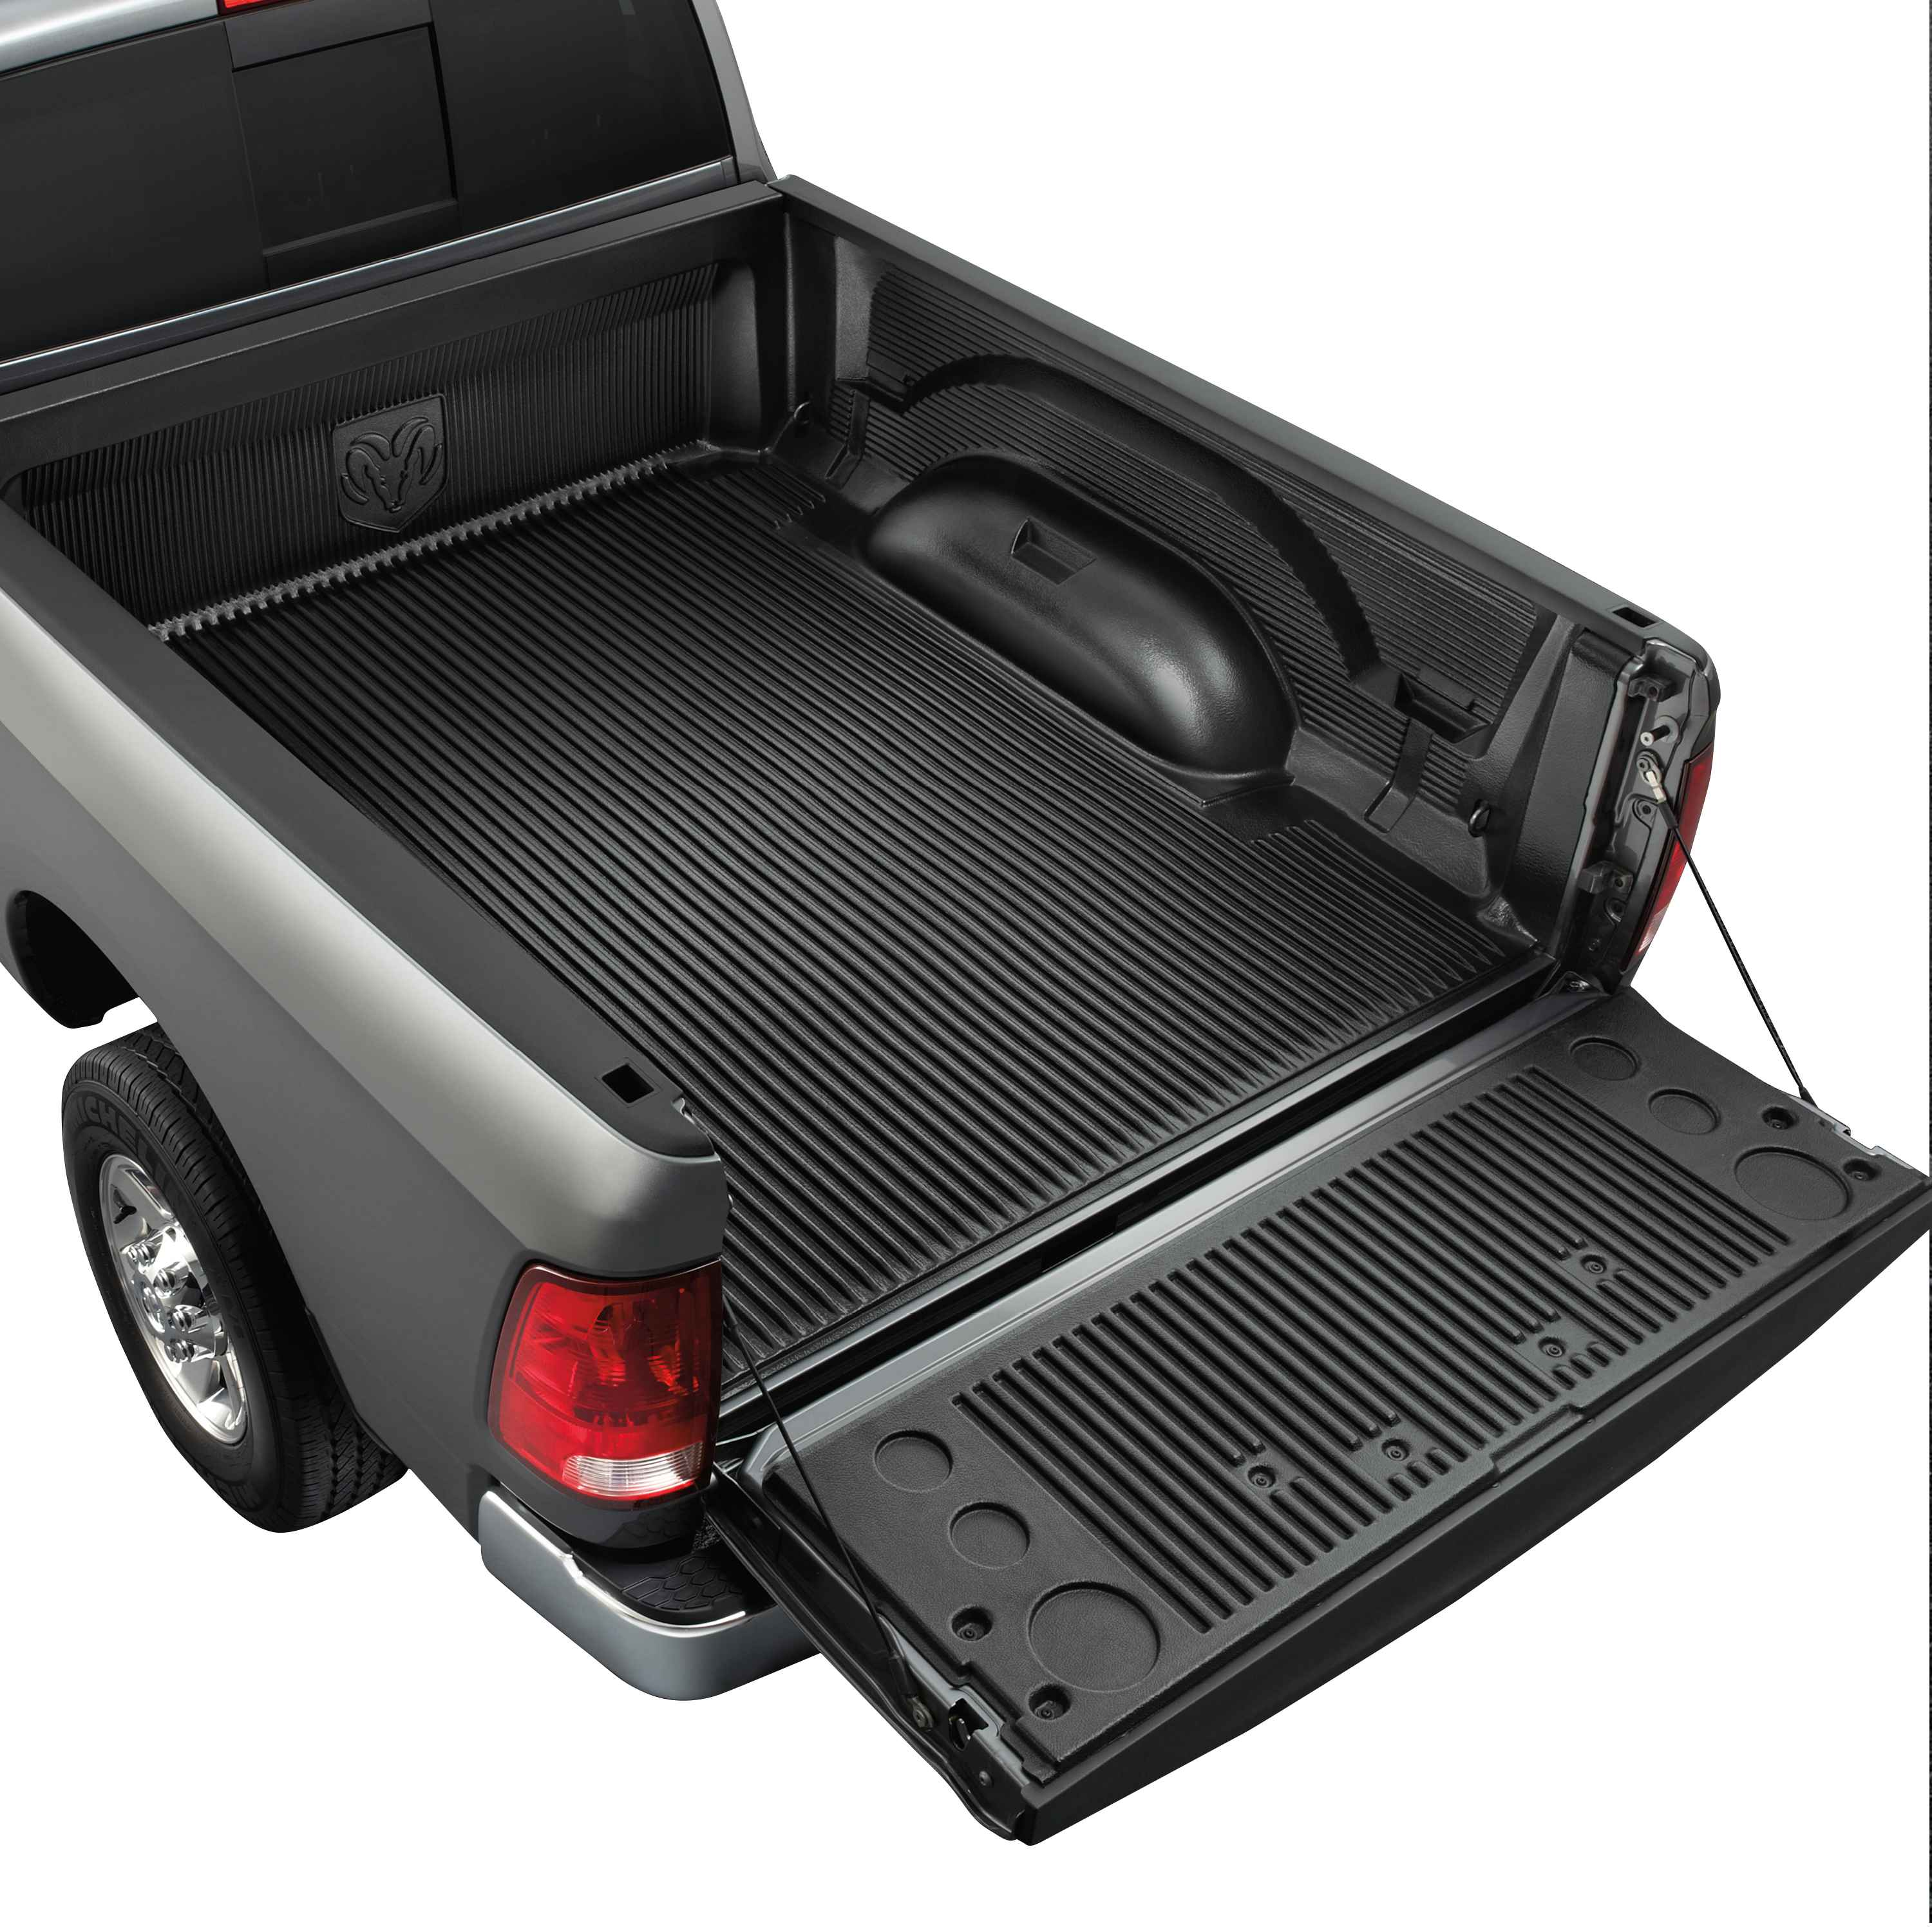 2020 RAM 3500 HD Drop-In Bedliner for 8 Bed - Dually 82214984AD